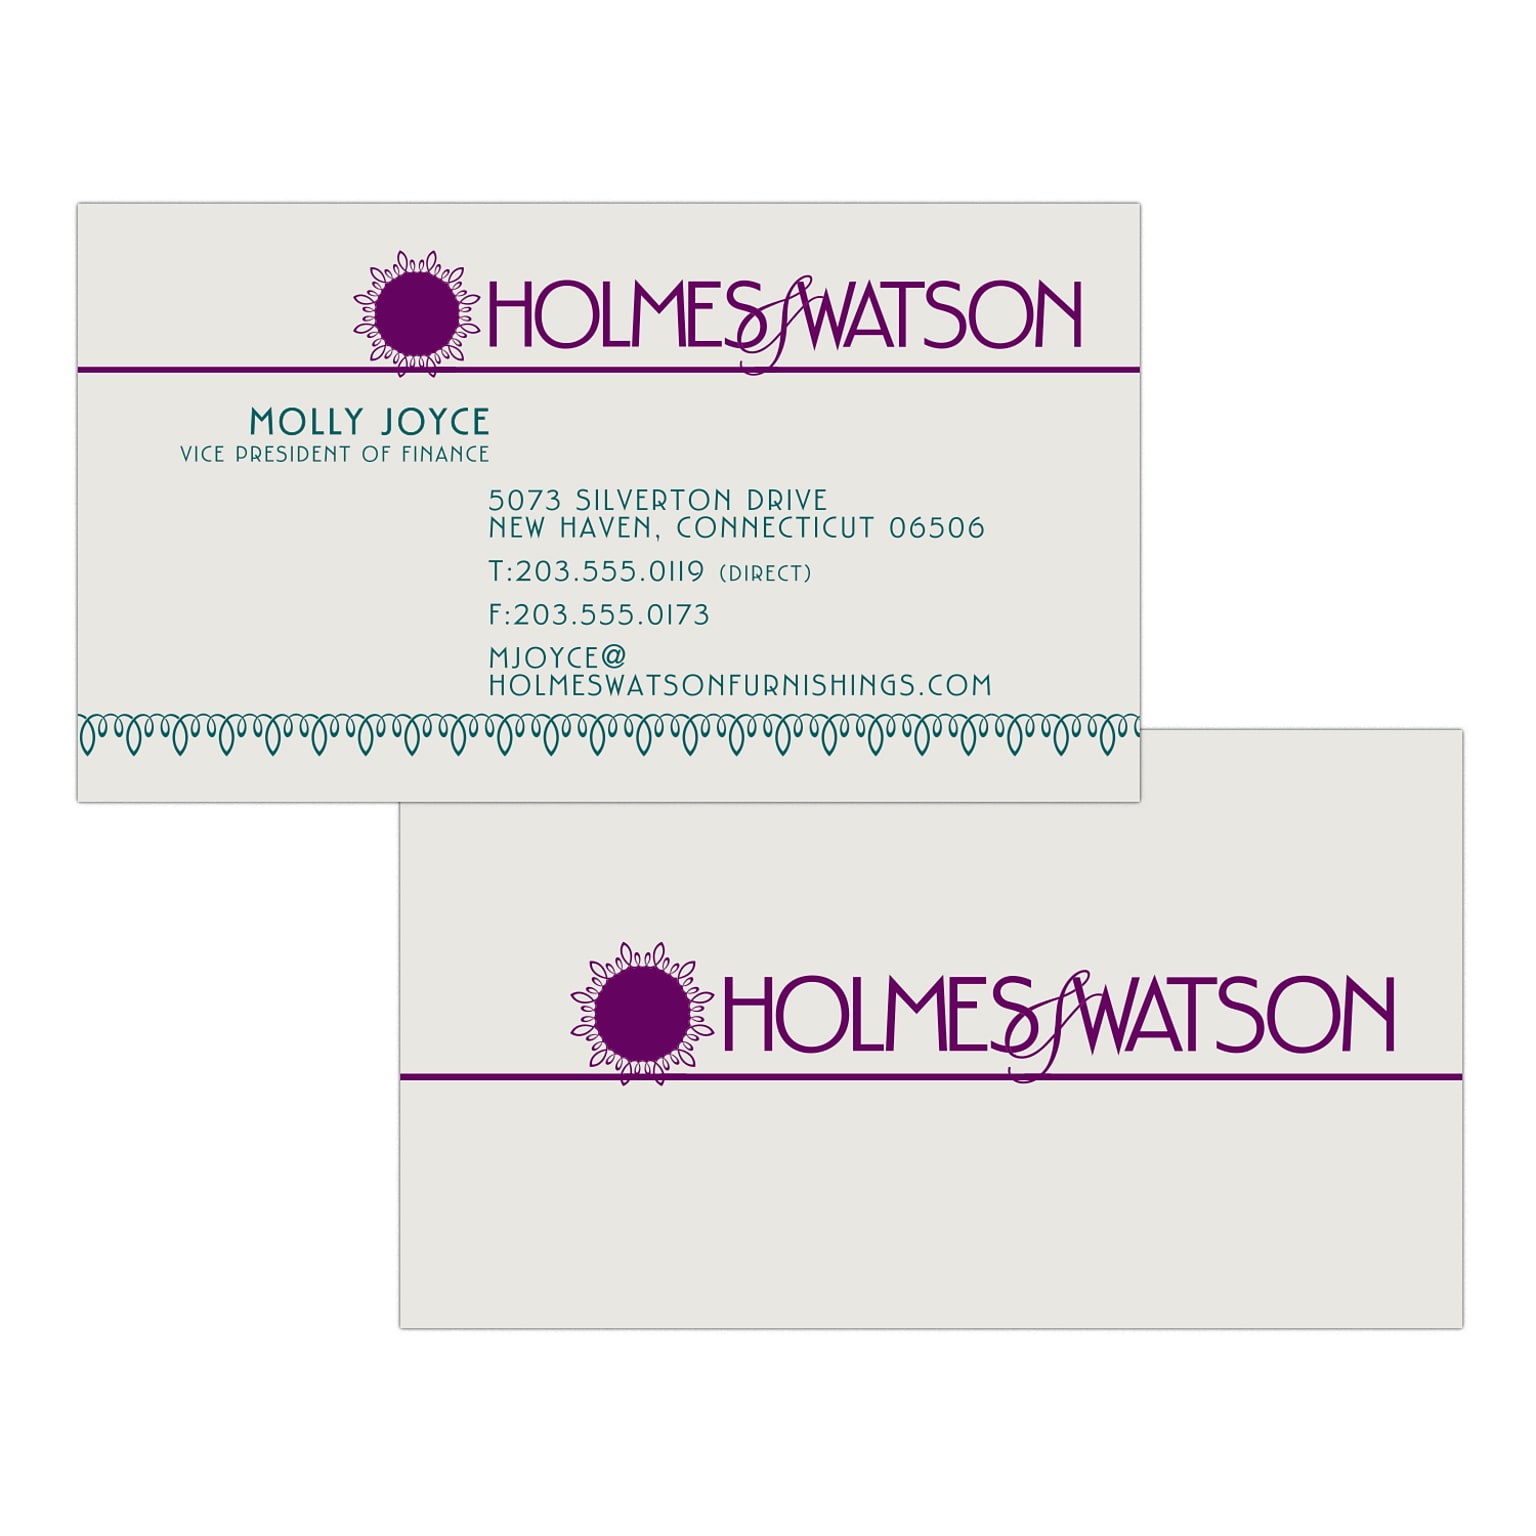 Custom 1-2 Color Business Cards, CLASSIC CREST® Smooth Antique Gray 80#, Flat Print, 2 Custom Inks, 2-Sided, 250/PK